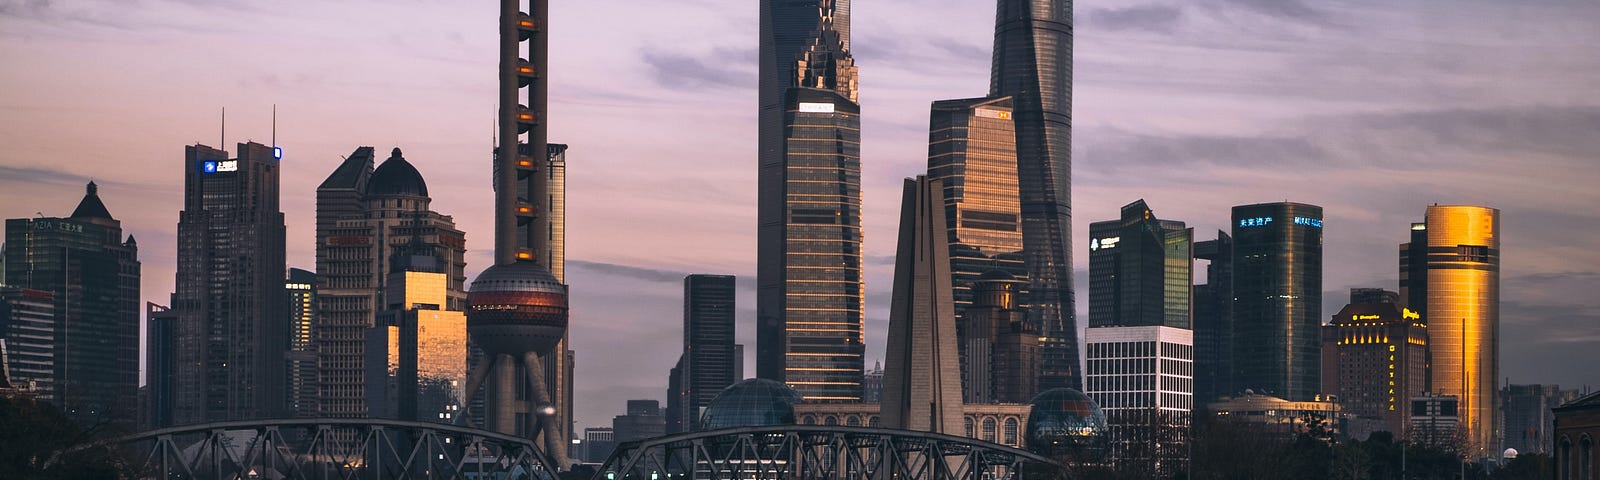 IMAGE: A view of Shanghai’s Pudong district taken from The Bund